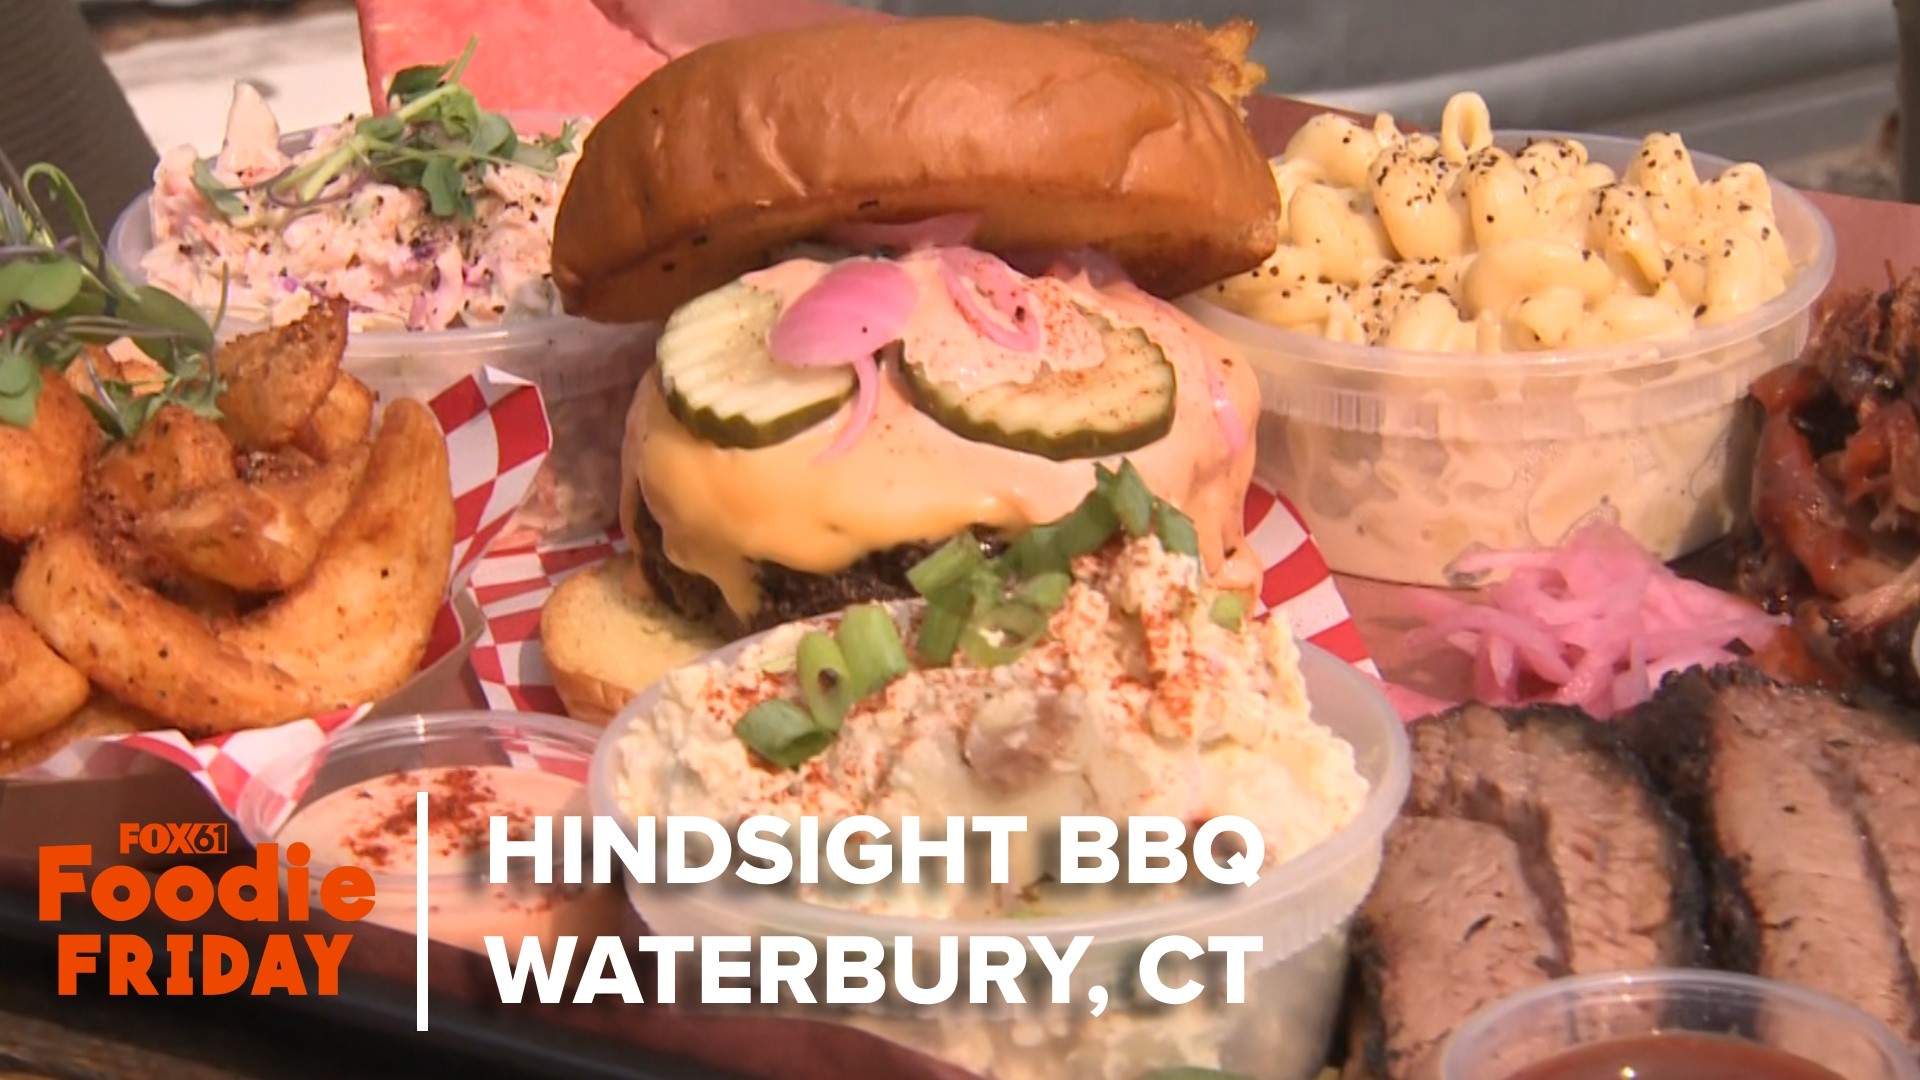 FOX61's Symphonie Privett visits Hindsight BBQ in Waterbury for Foodie Friday.